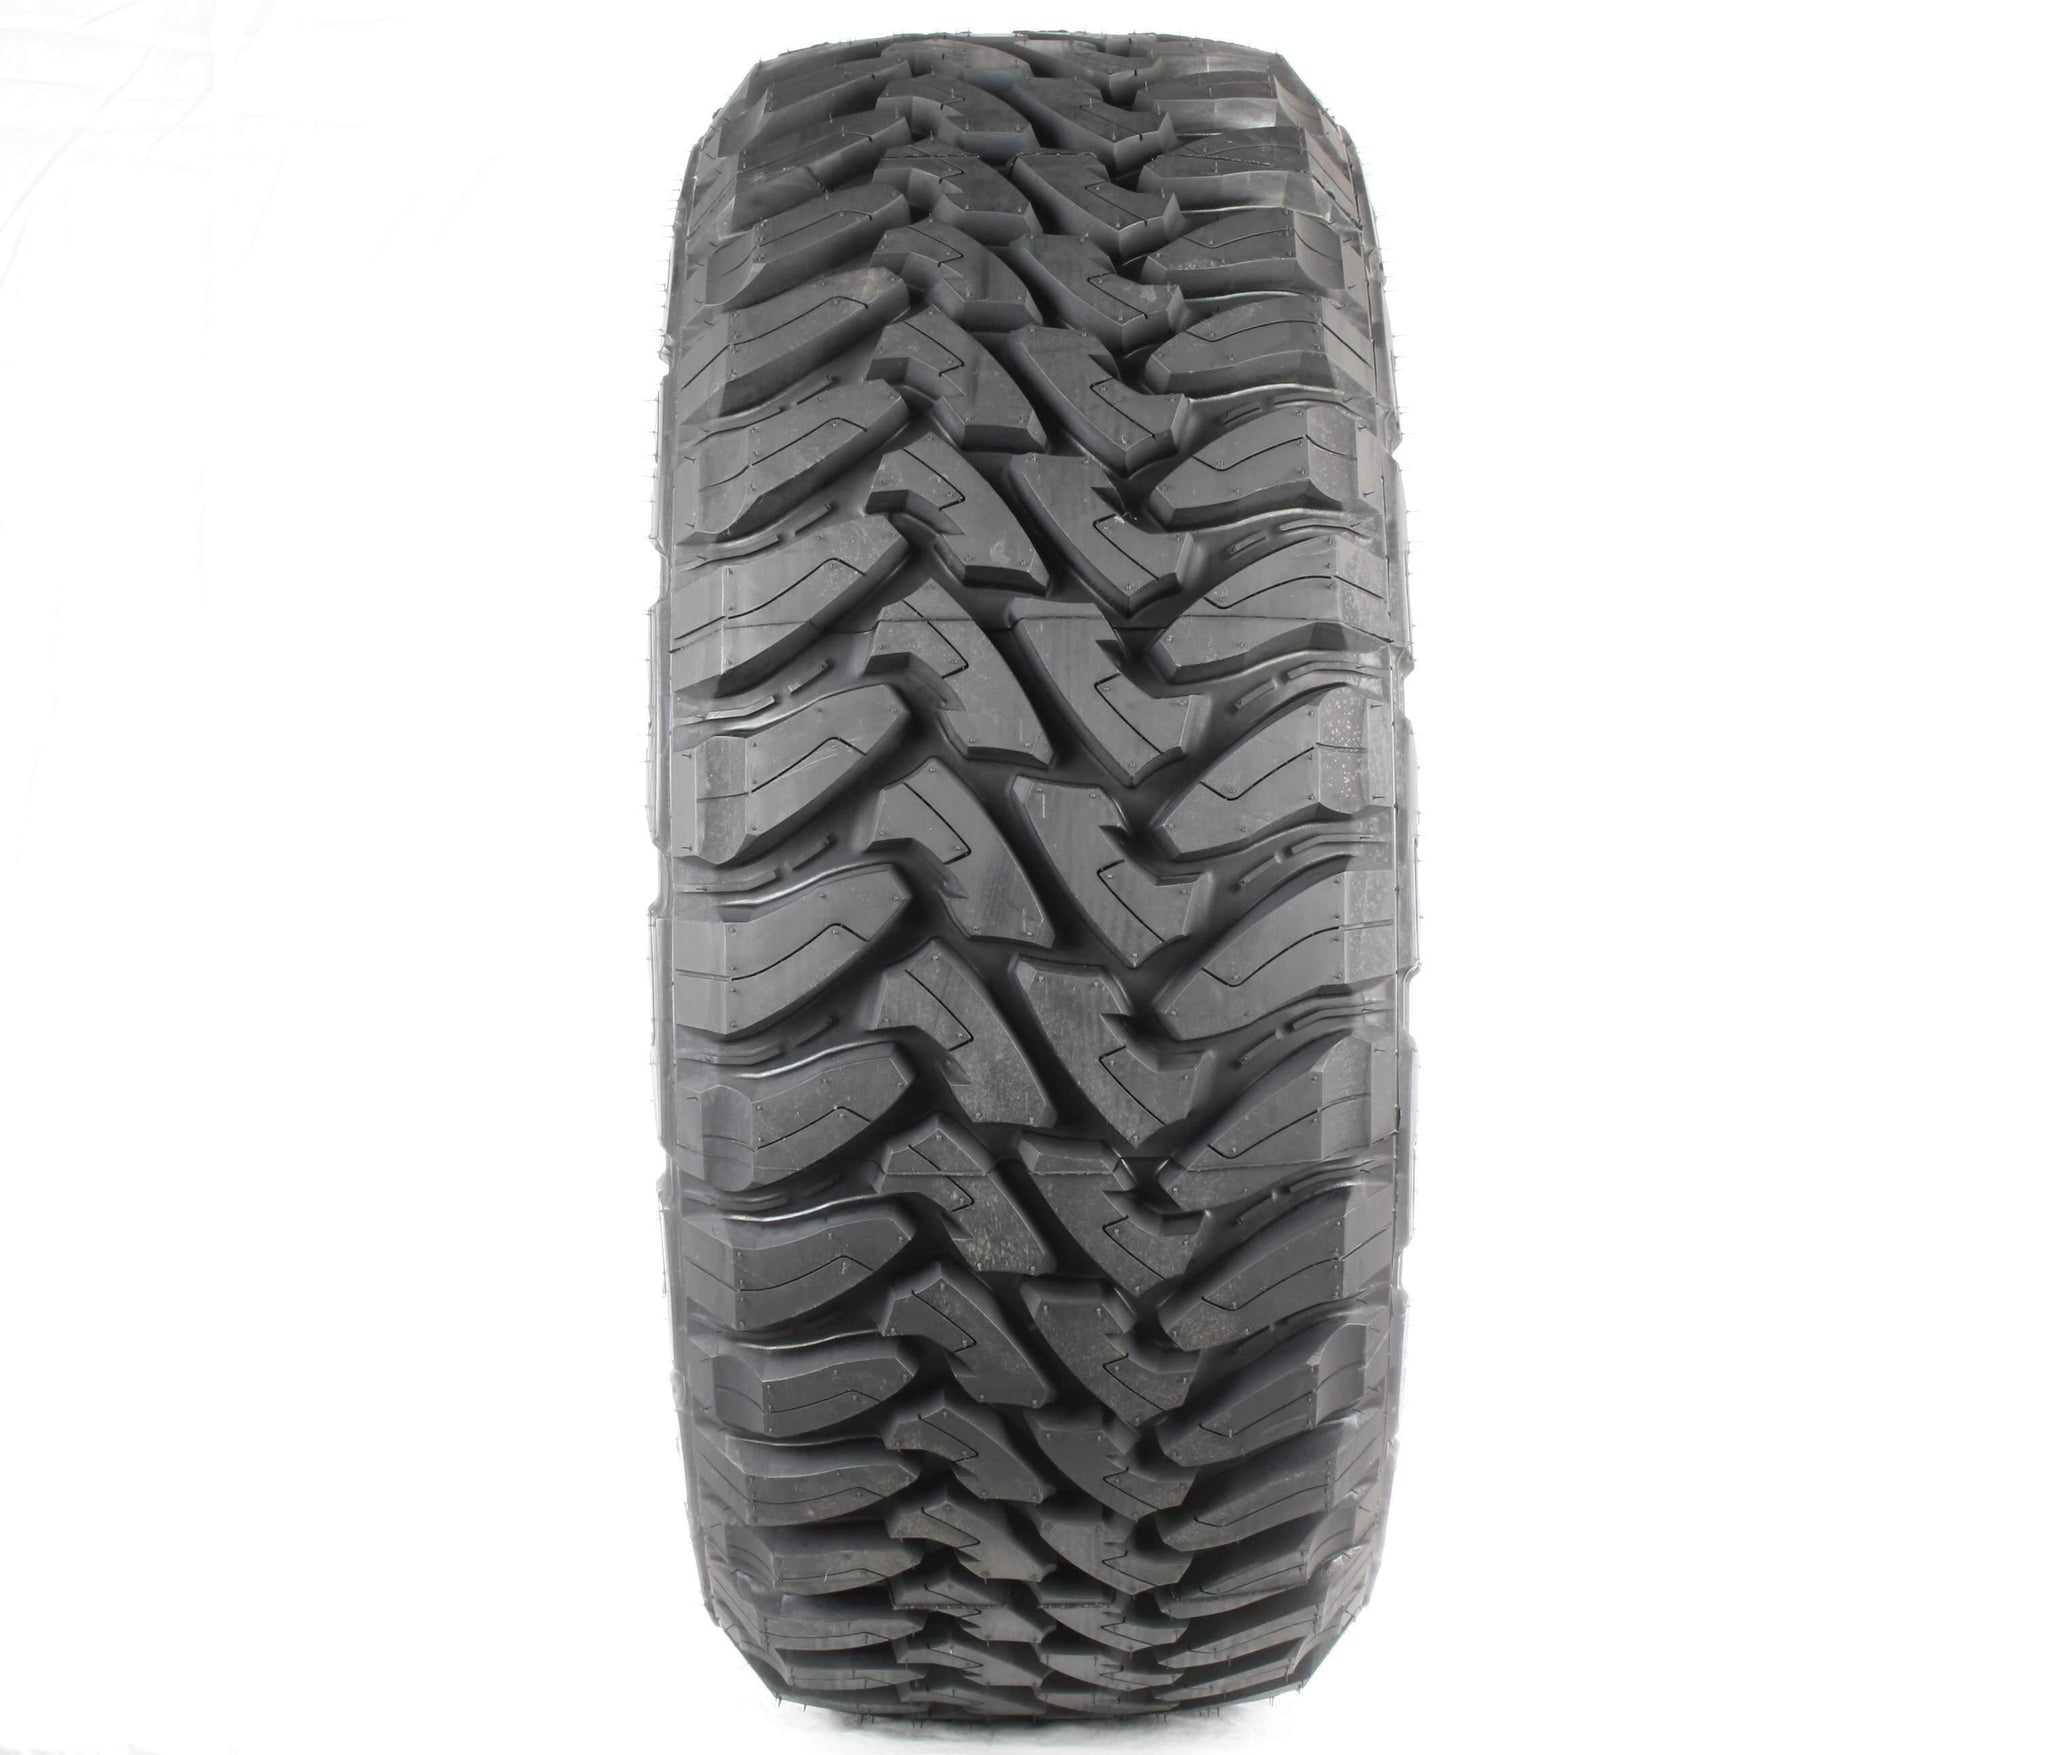 TOYO TIRES OPEN COUNTRY M/T 33X12.50R15LT Tires